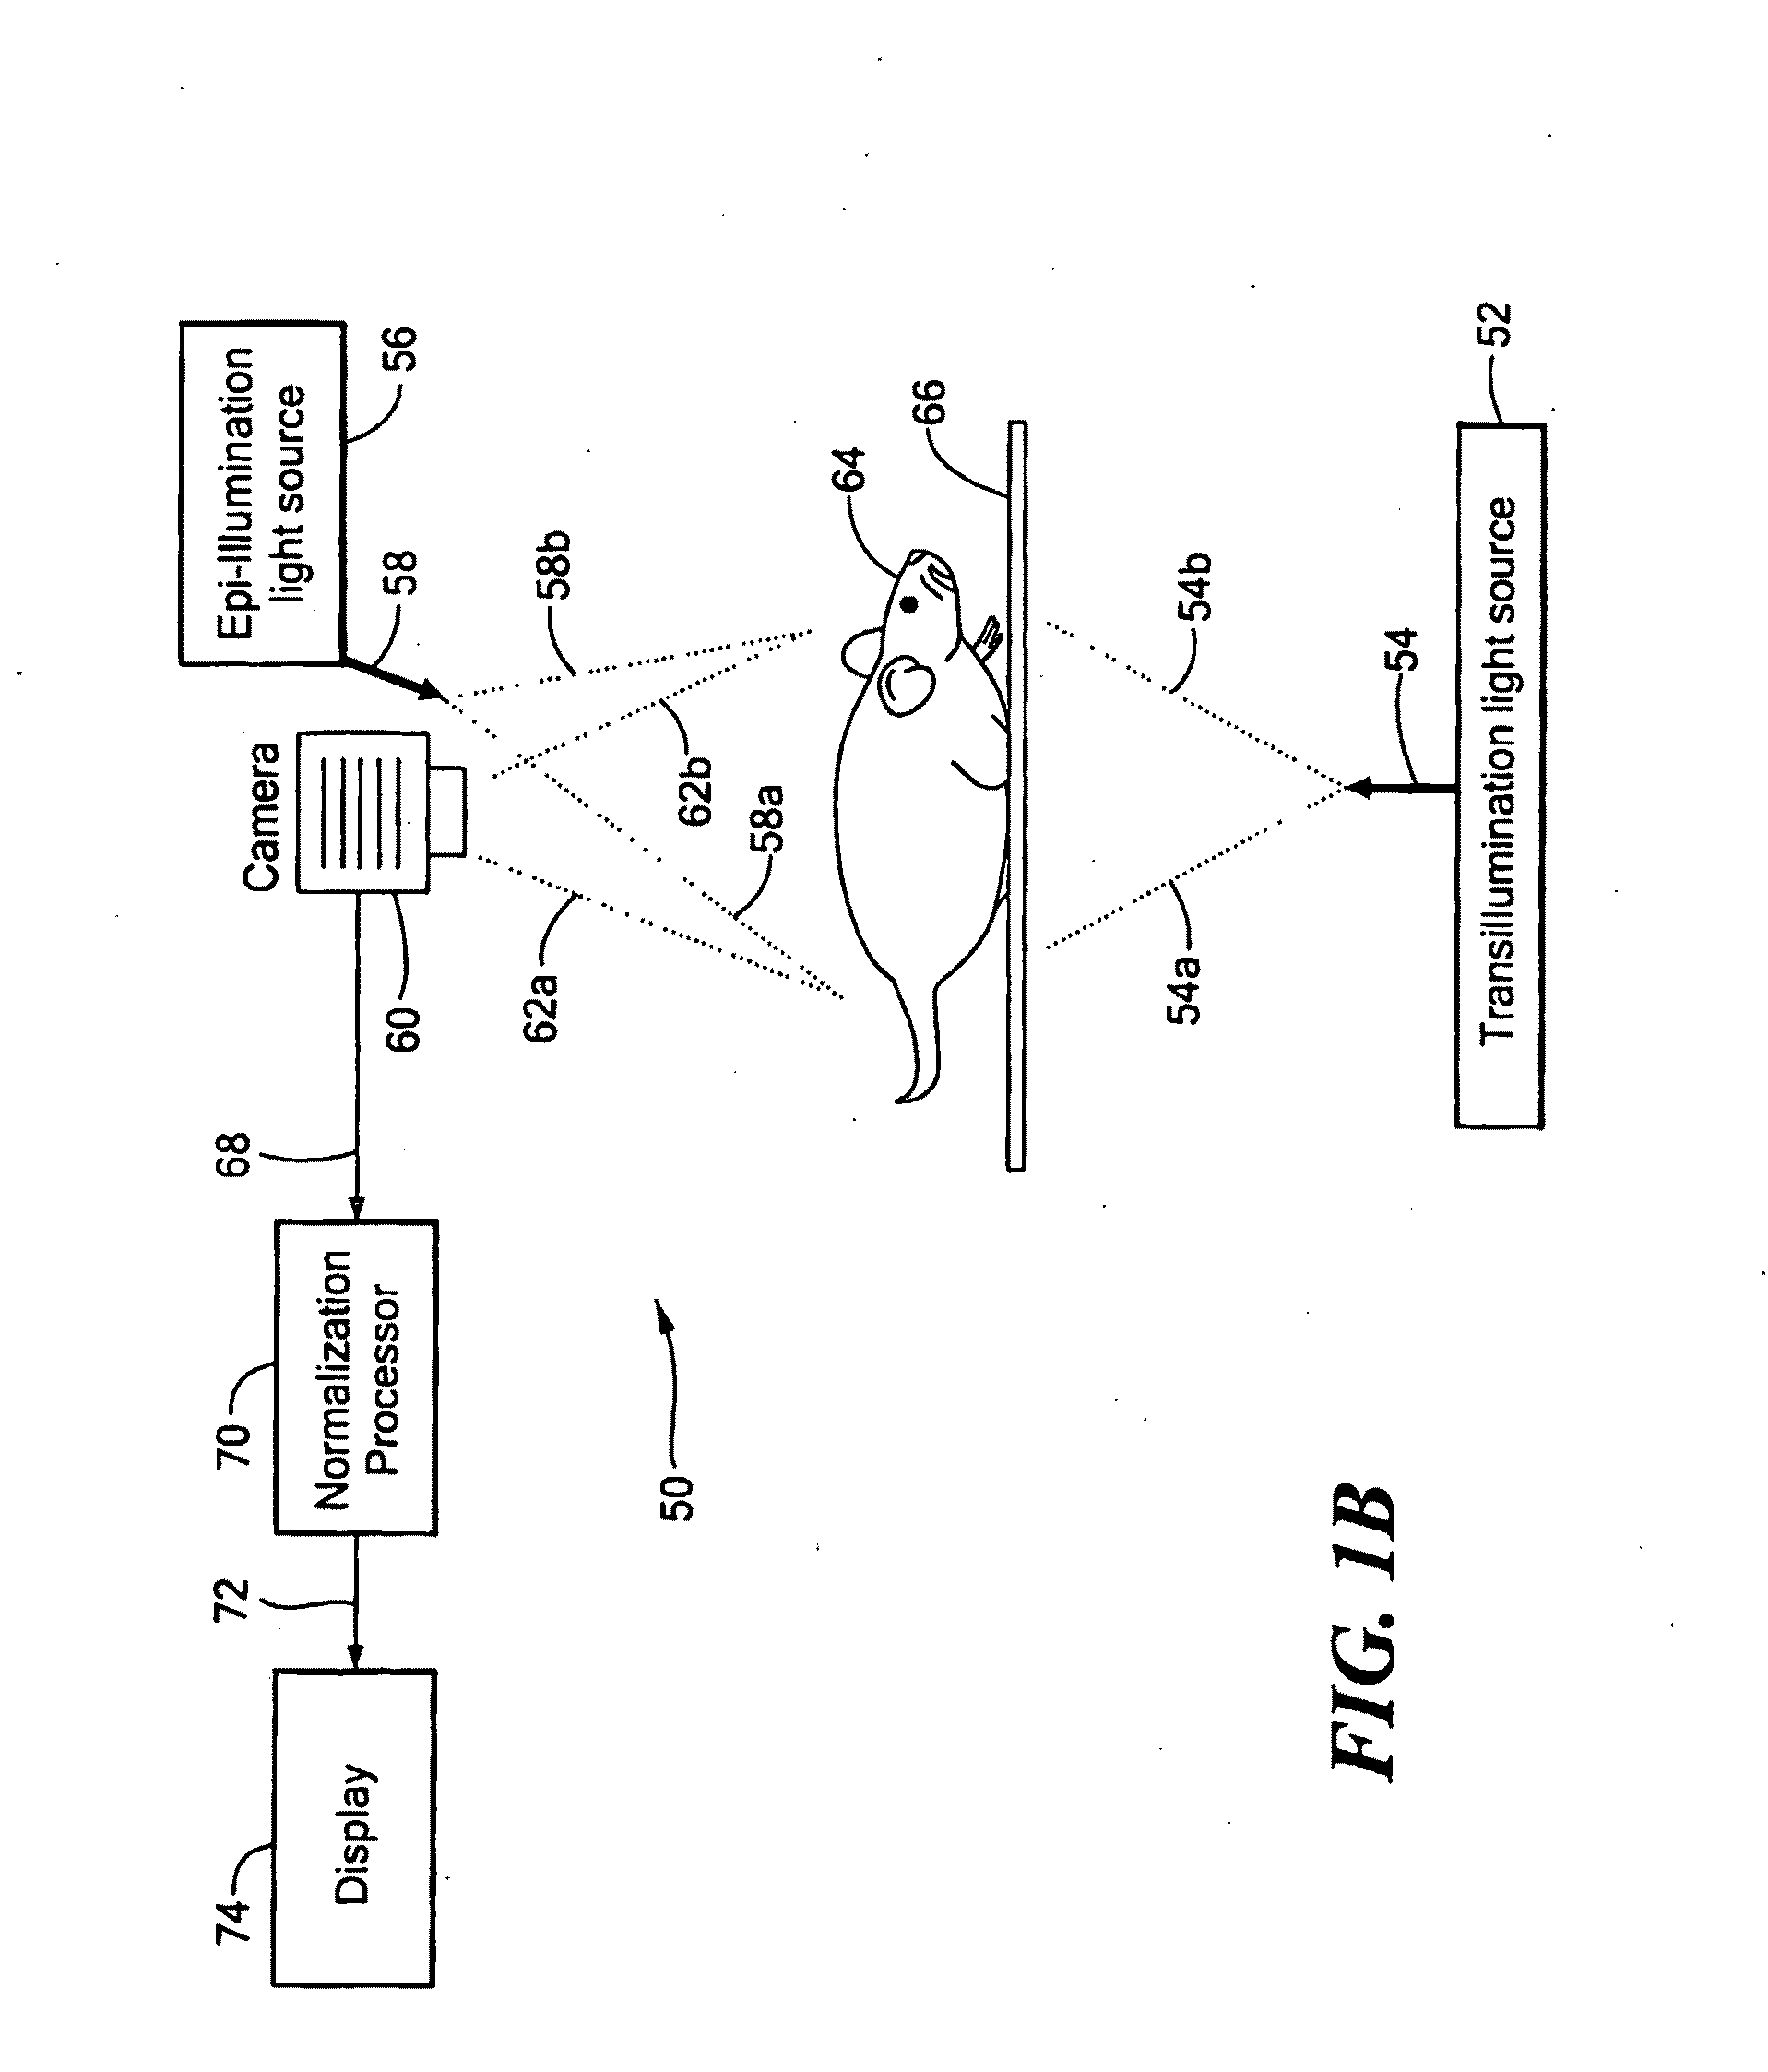 System and Method for Normalized Flourescence or Bioluminescence Imaging